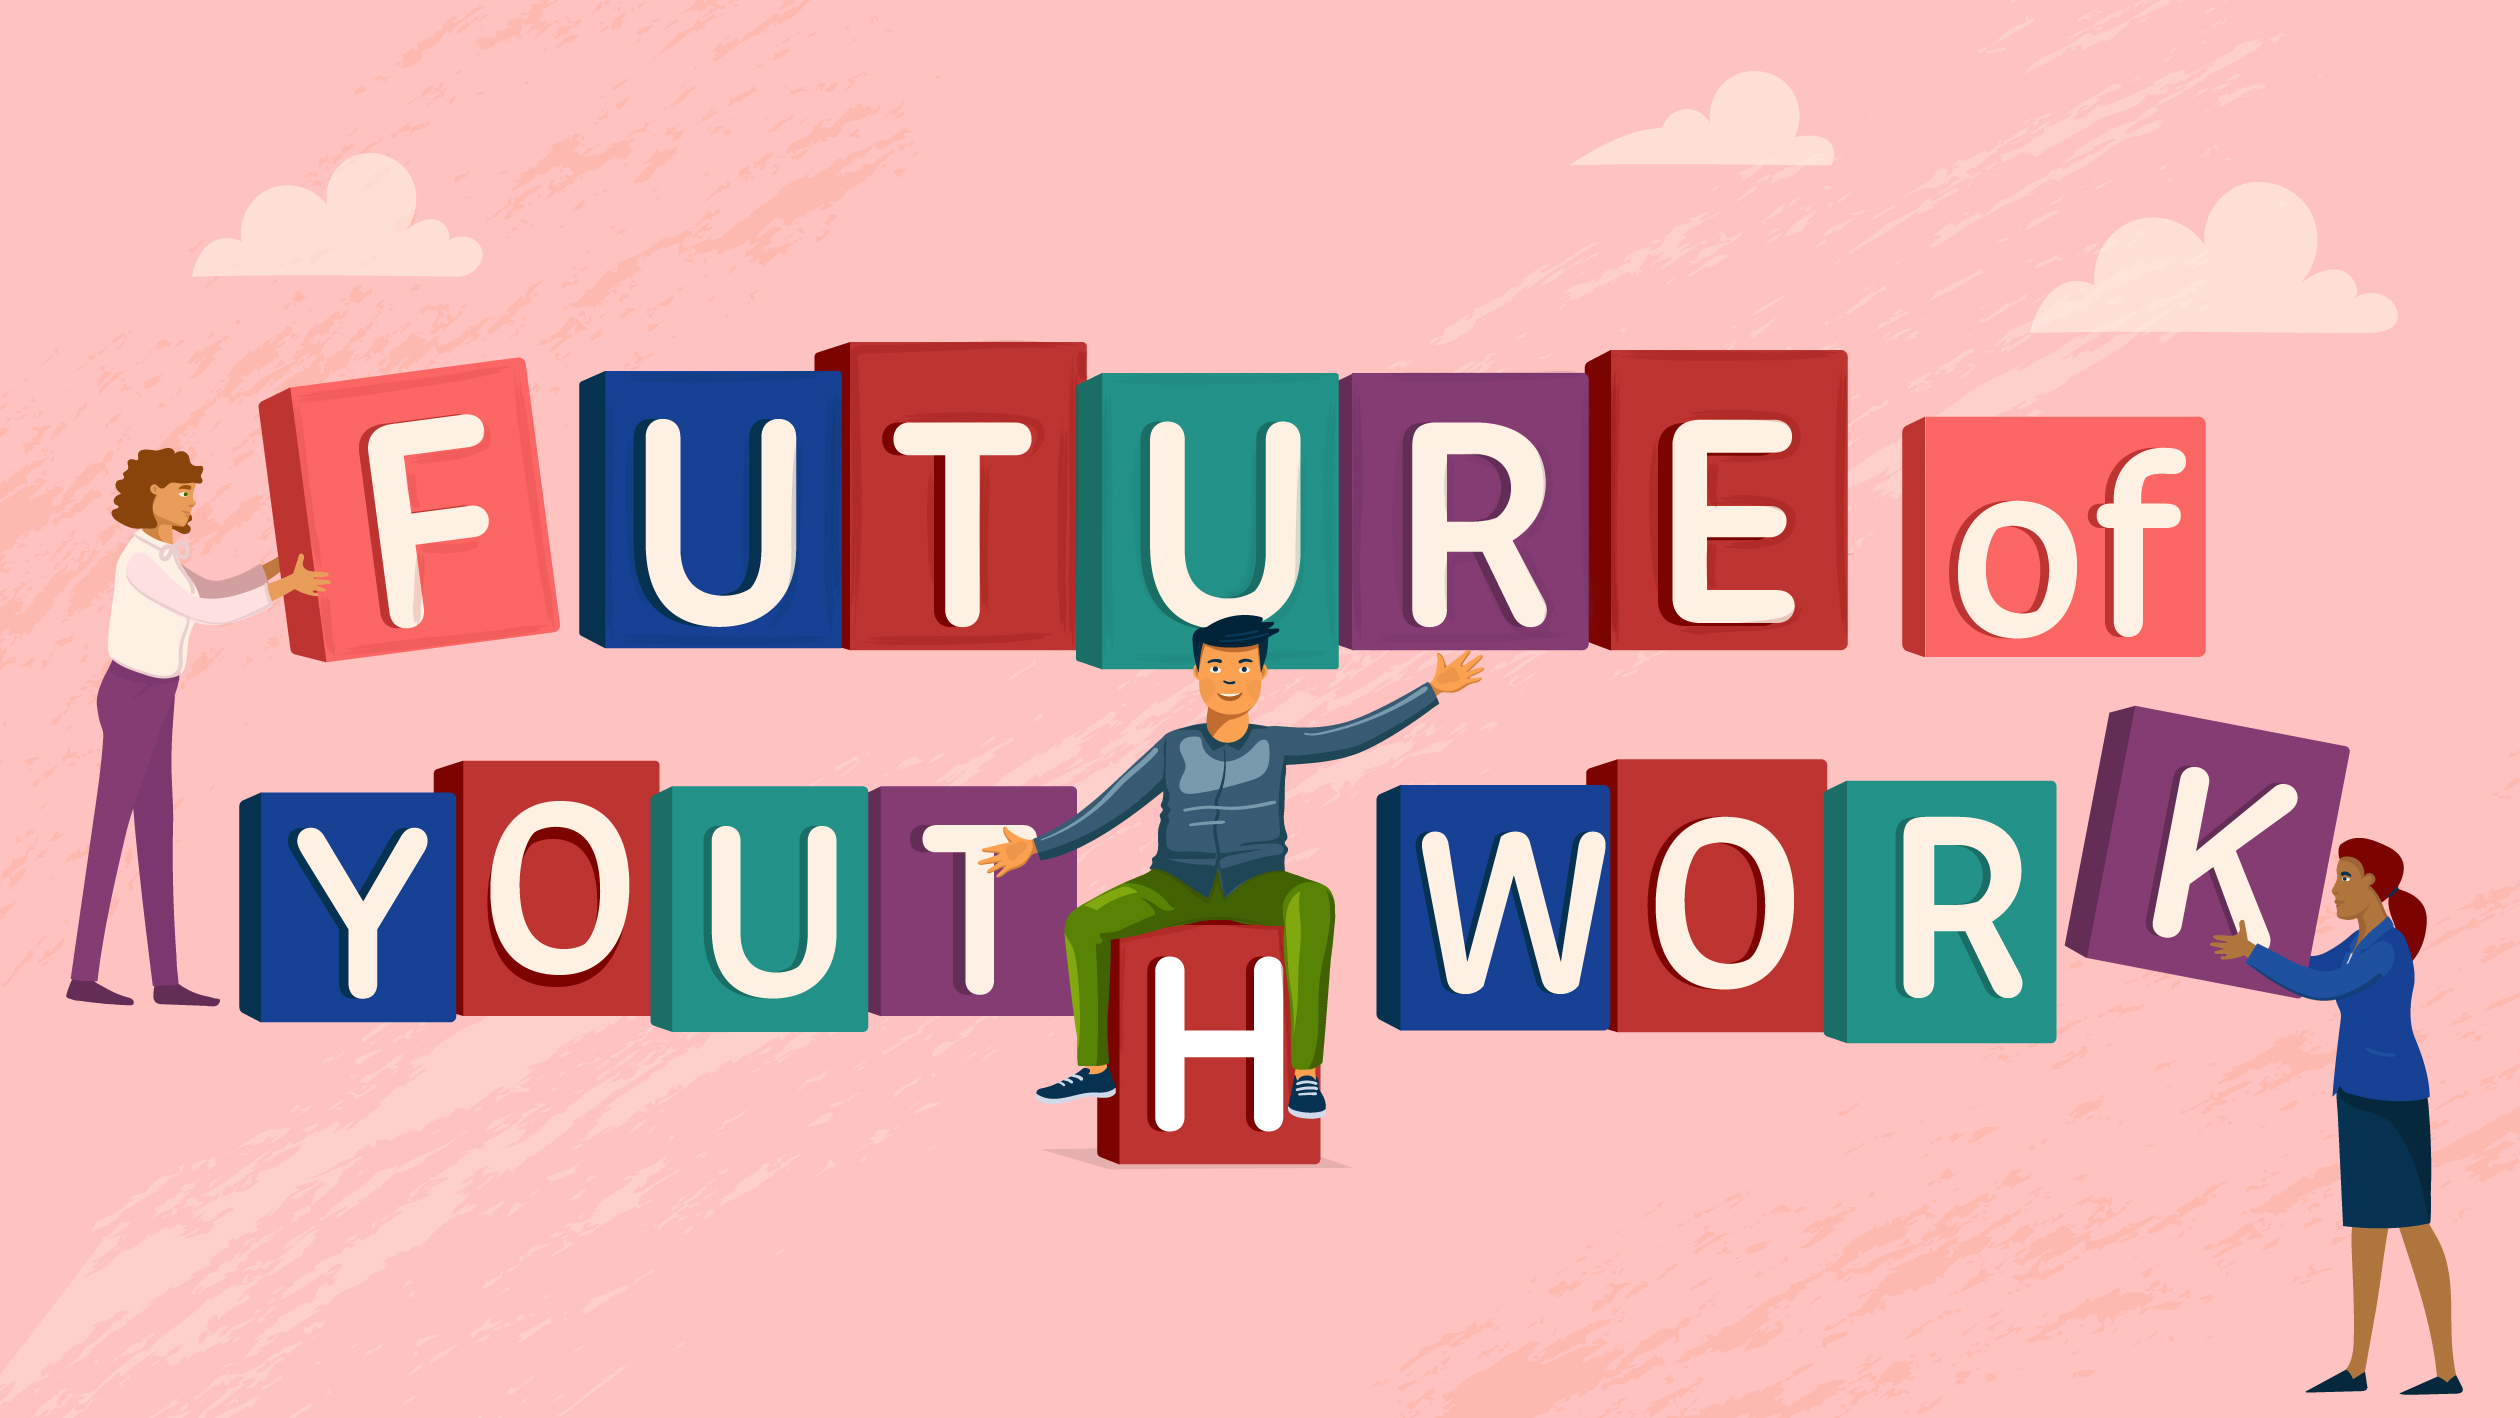 Shaping the future of youth work